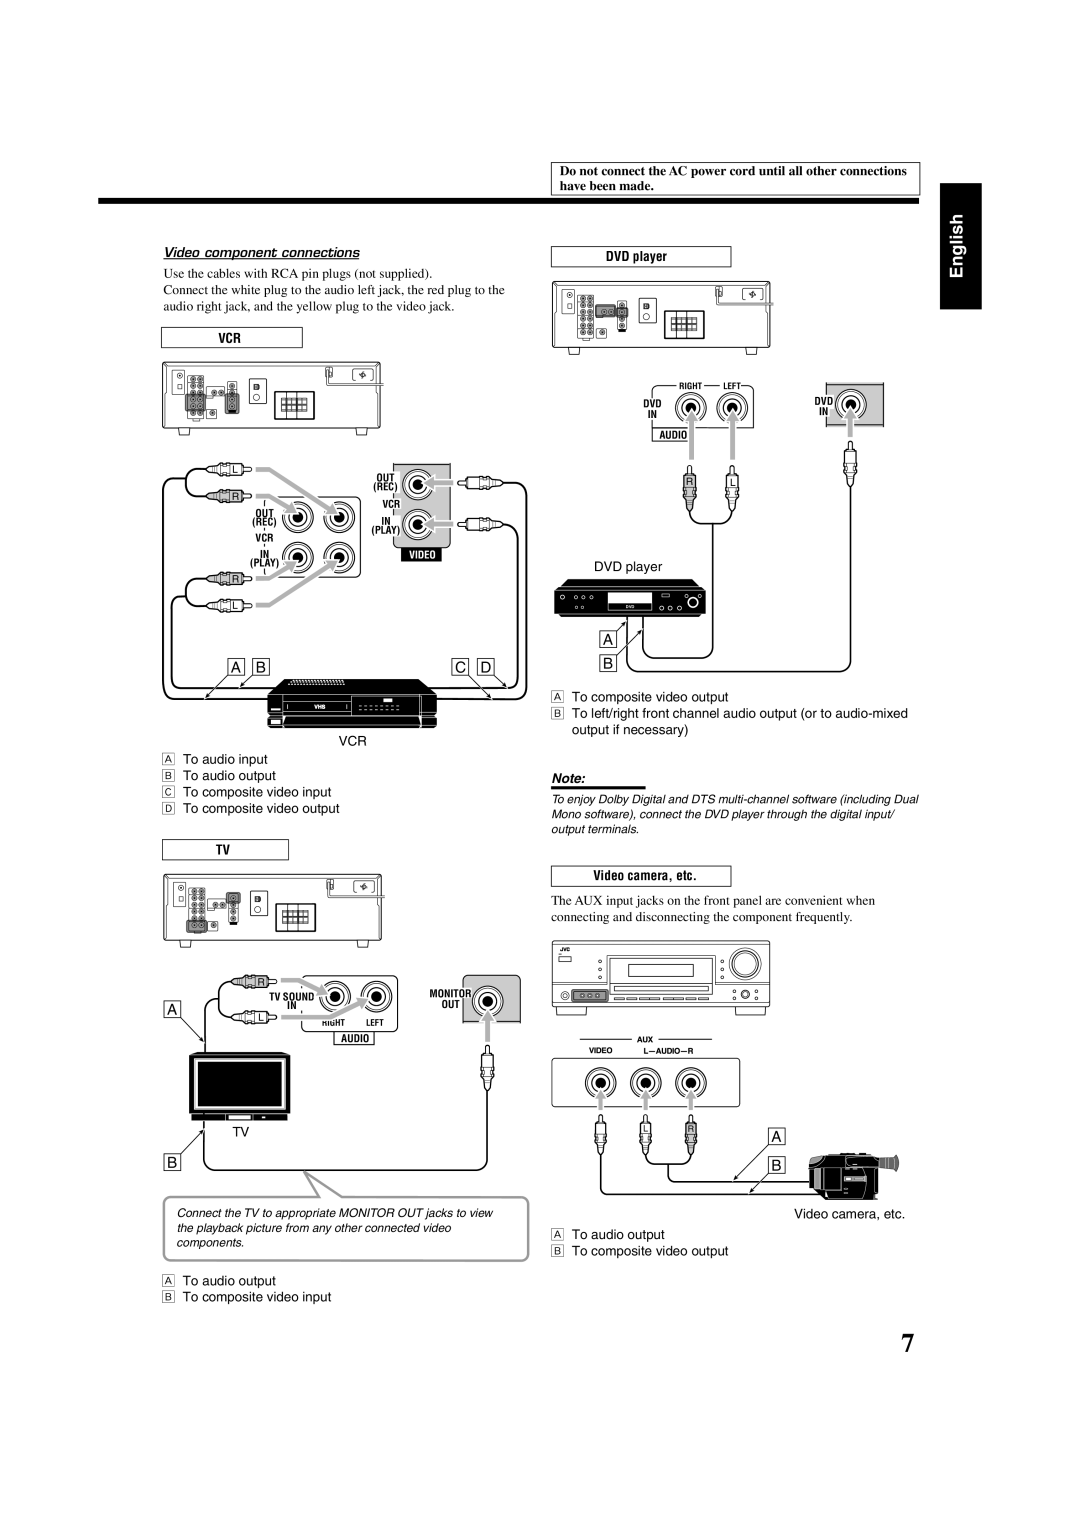 JVC LVT1507-012A manual English, Video component connections 